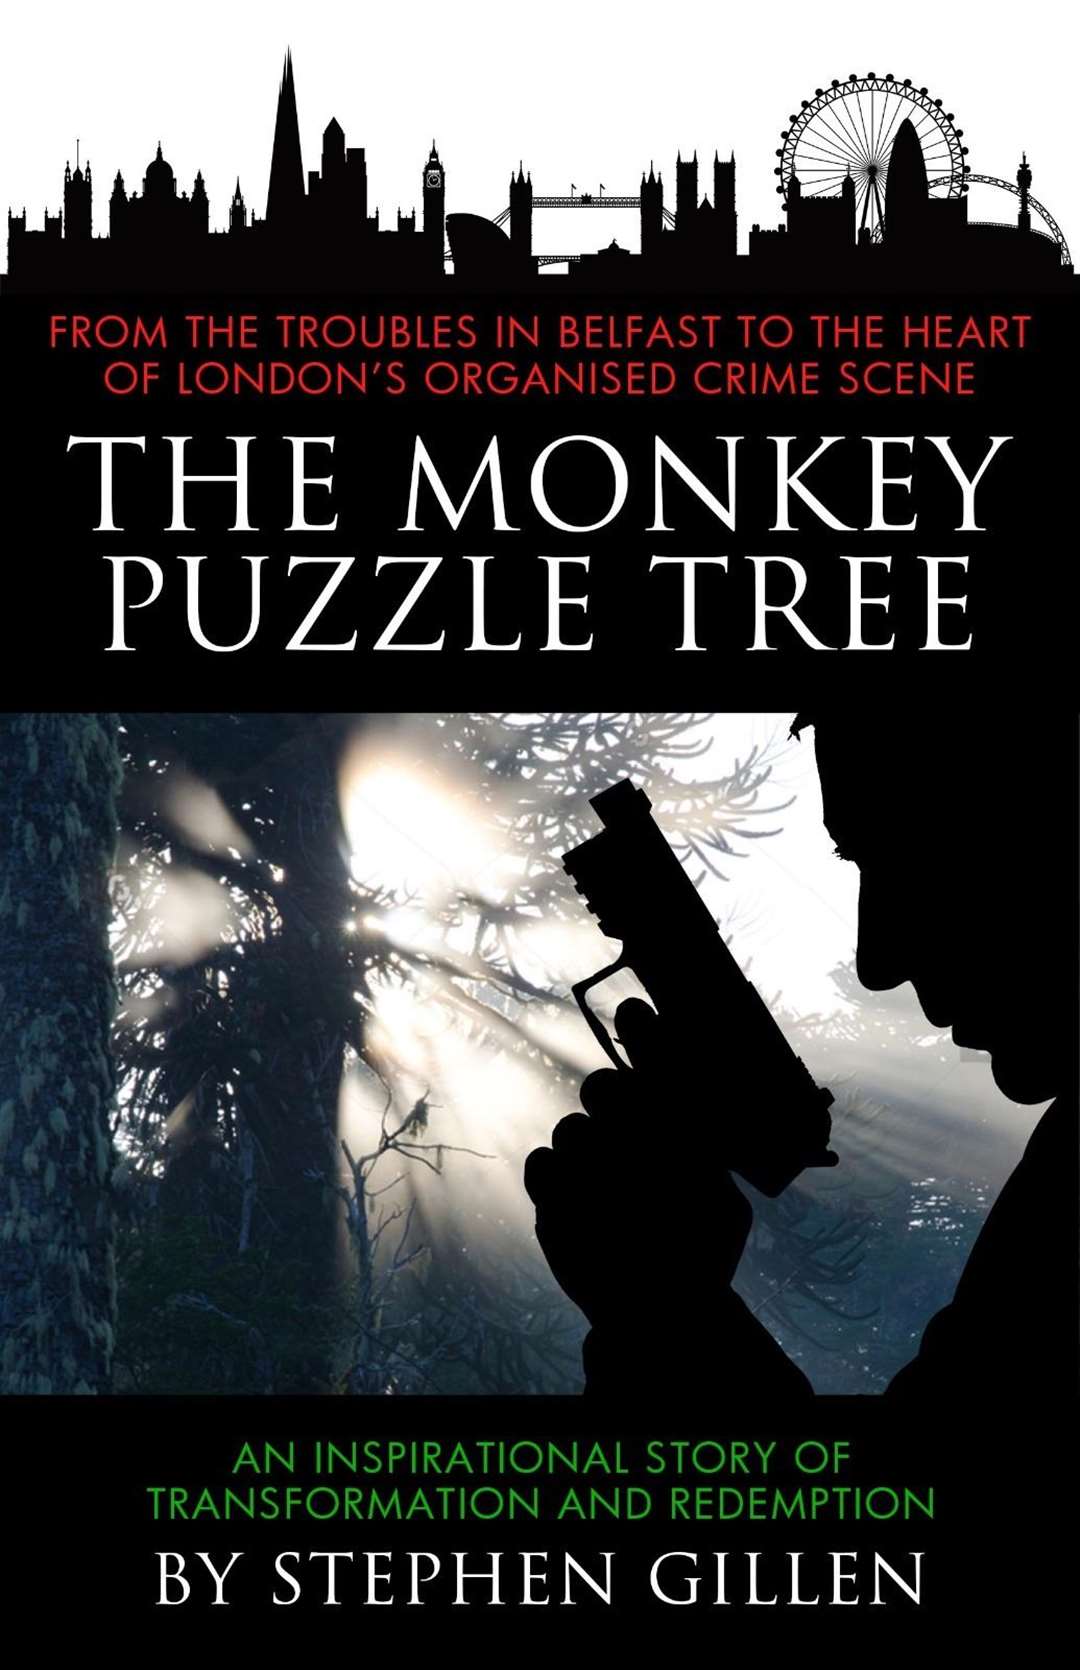 The cover of Mr Gillen's first book 'The Monkey Puzzle Tree' is set to be made into a Hollywood film. Picture: Daphne Diluce